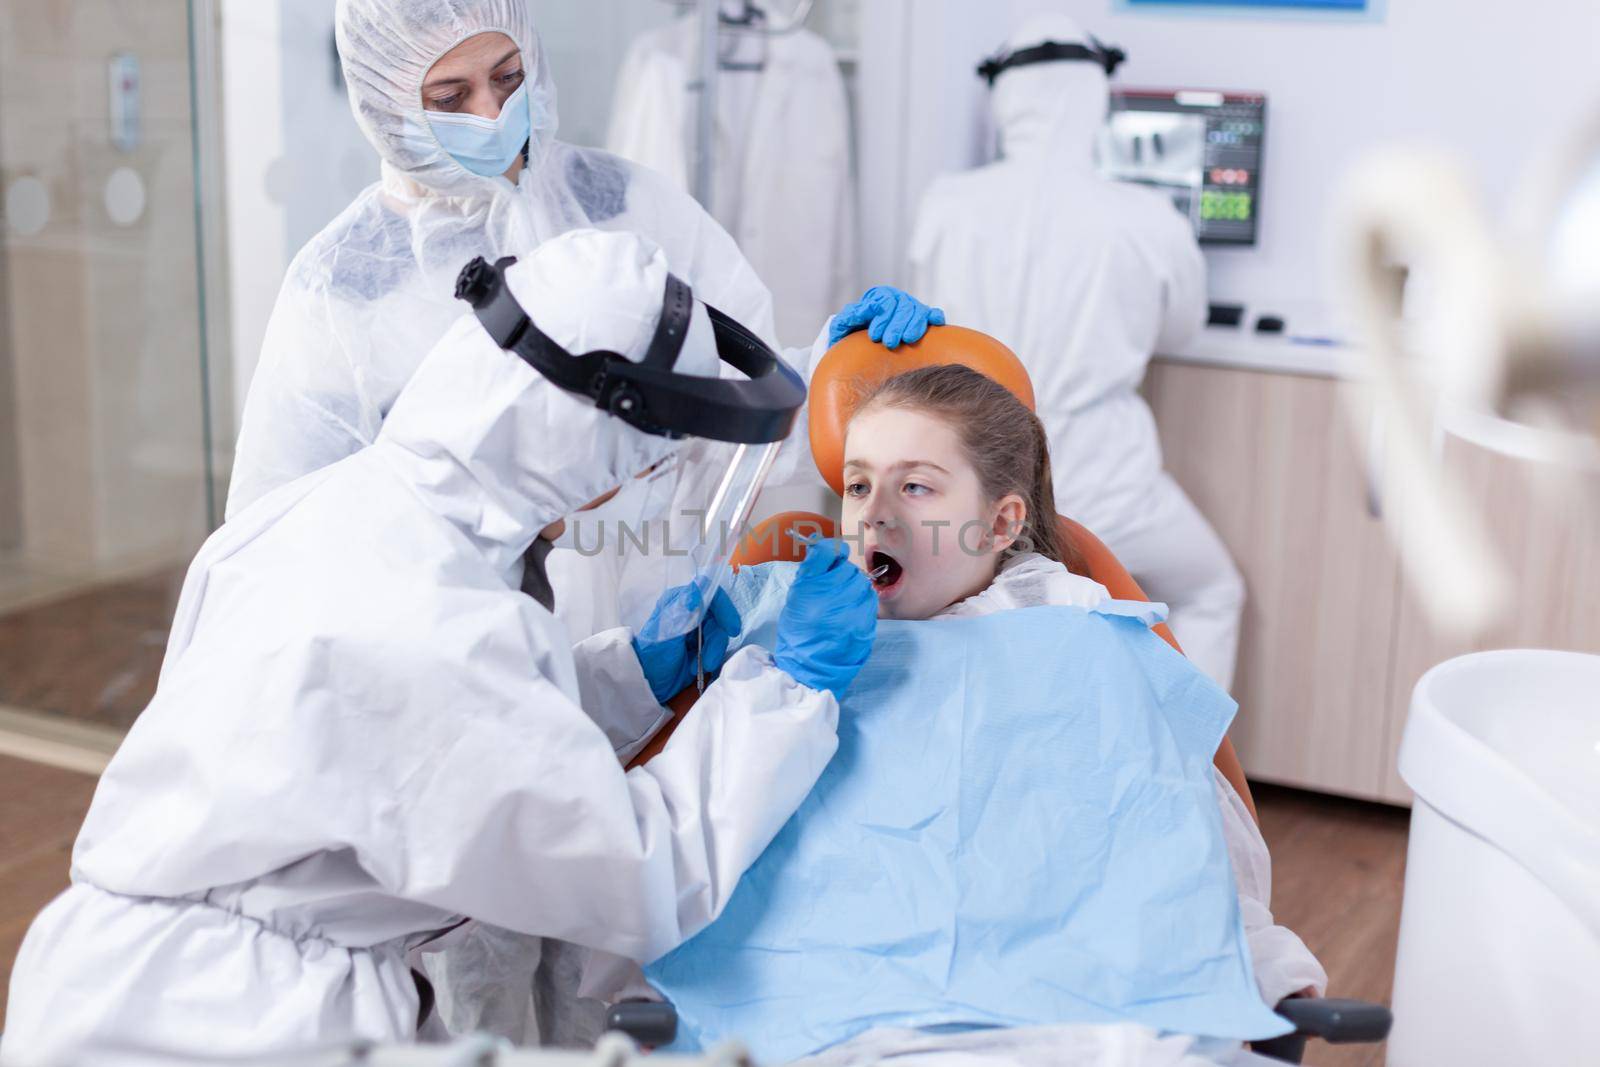 Stomatolog in ppe suit during teeth examination of child wearing bib sitting on dental chair. Dentist in coronavirus suit using curved mirror during teeth examination of child.